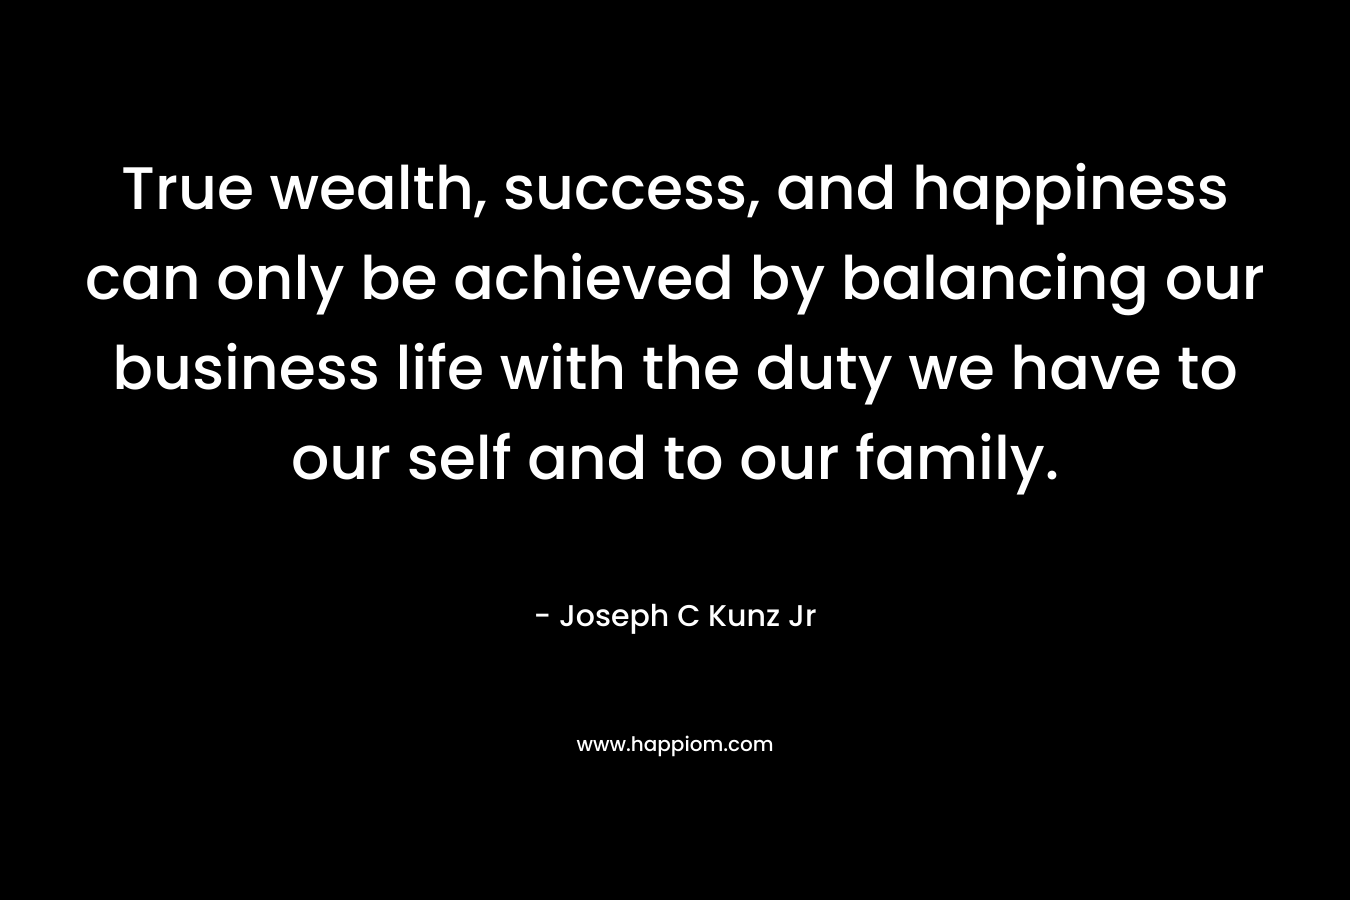 True wealth, success, and happiness can only be achieved by balancing our business life with the duty we have to our self and to our family. – Joseph C Kunz Jr